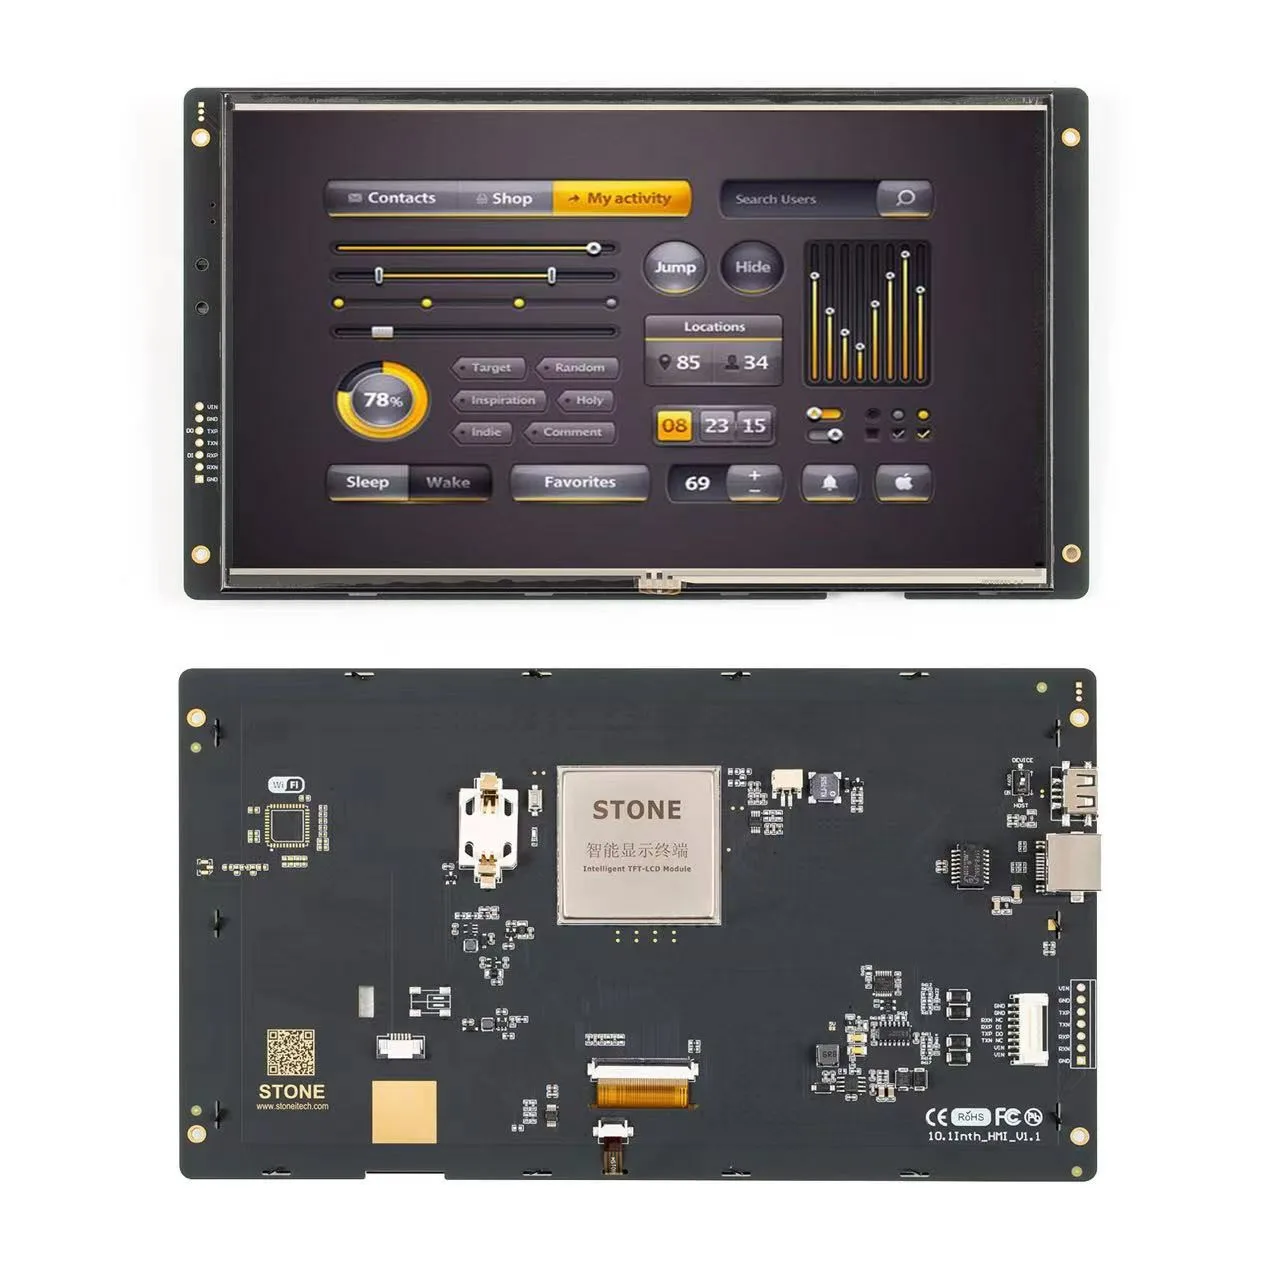 10.1 Inch LCD-TFT HMI Display Module Intelligent Series RS232/TTL Resistive Touch Panel for Industrial Equipment Control